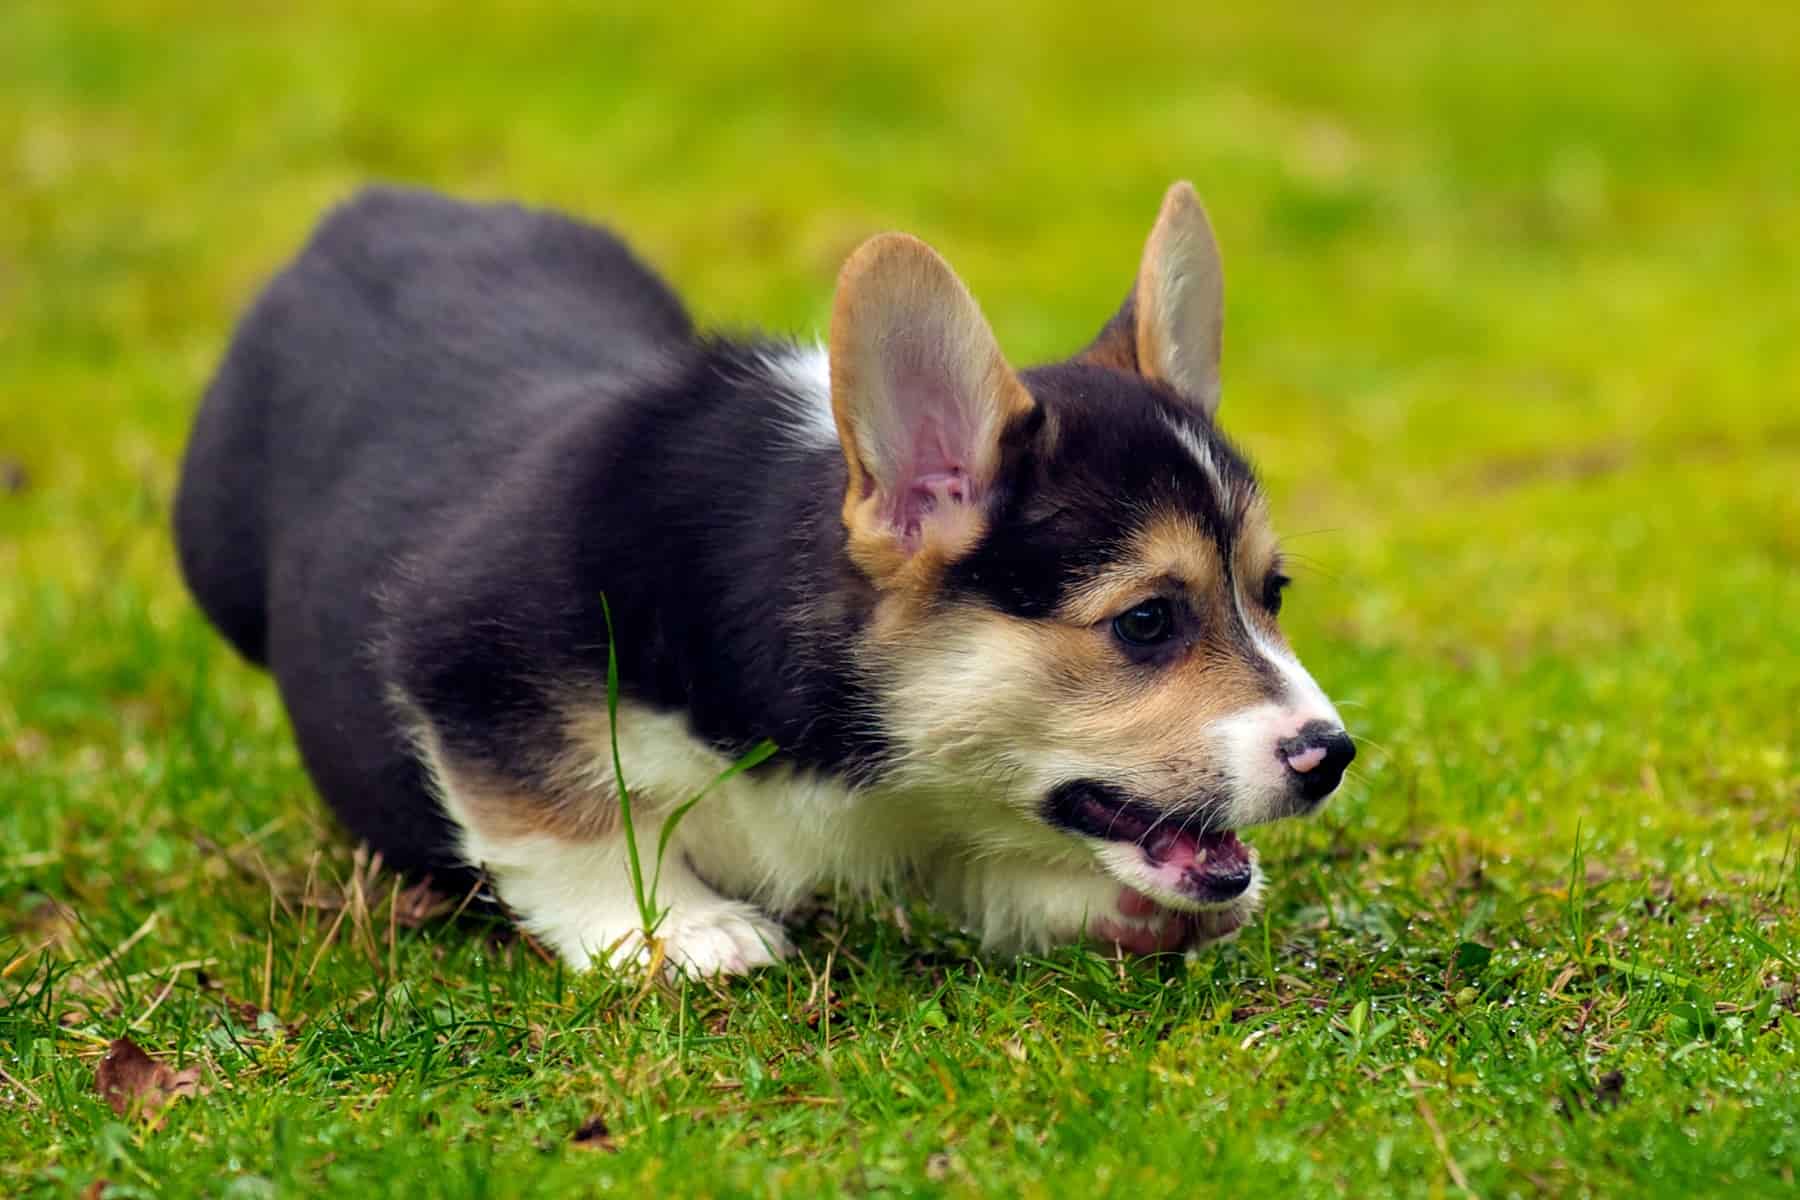 How to train your corgi not to bark? This corgi puppy is learning how not to bark in his backyard.